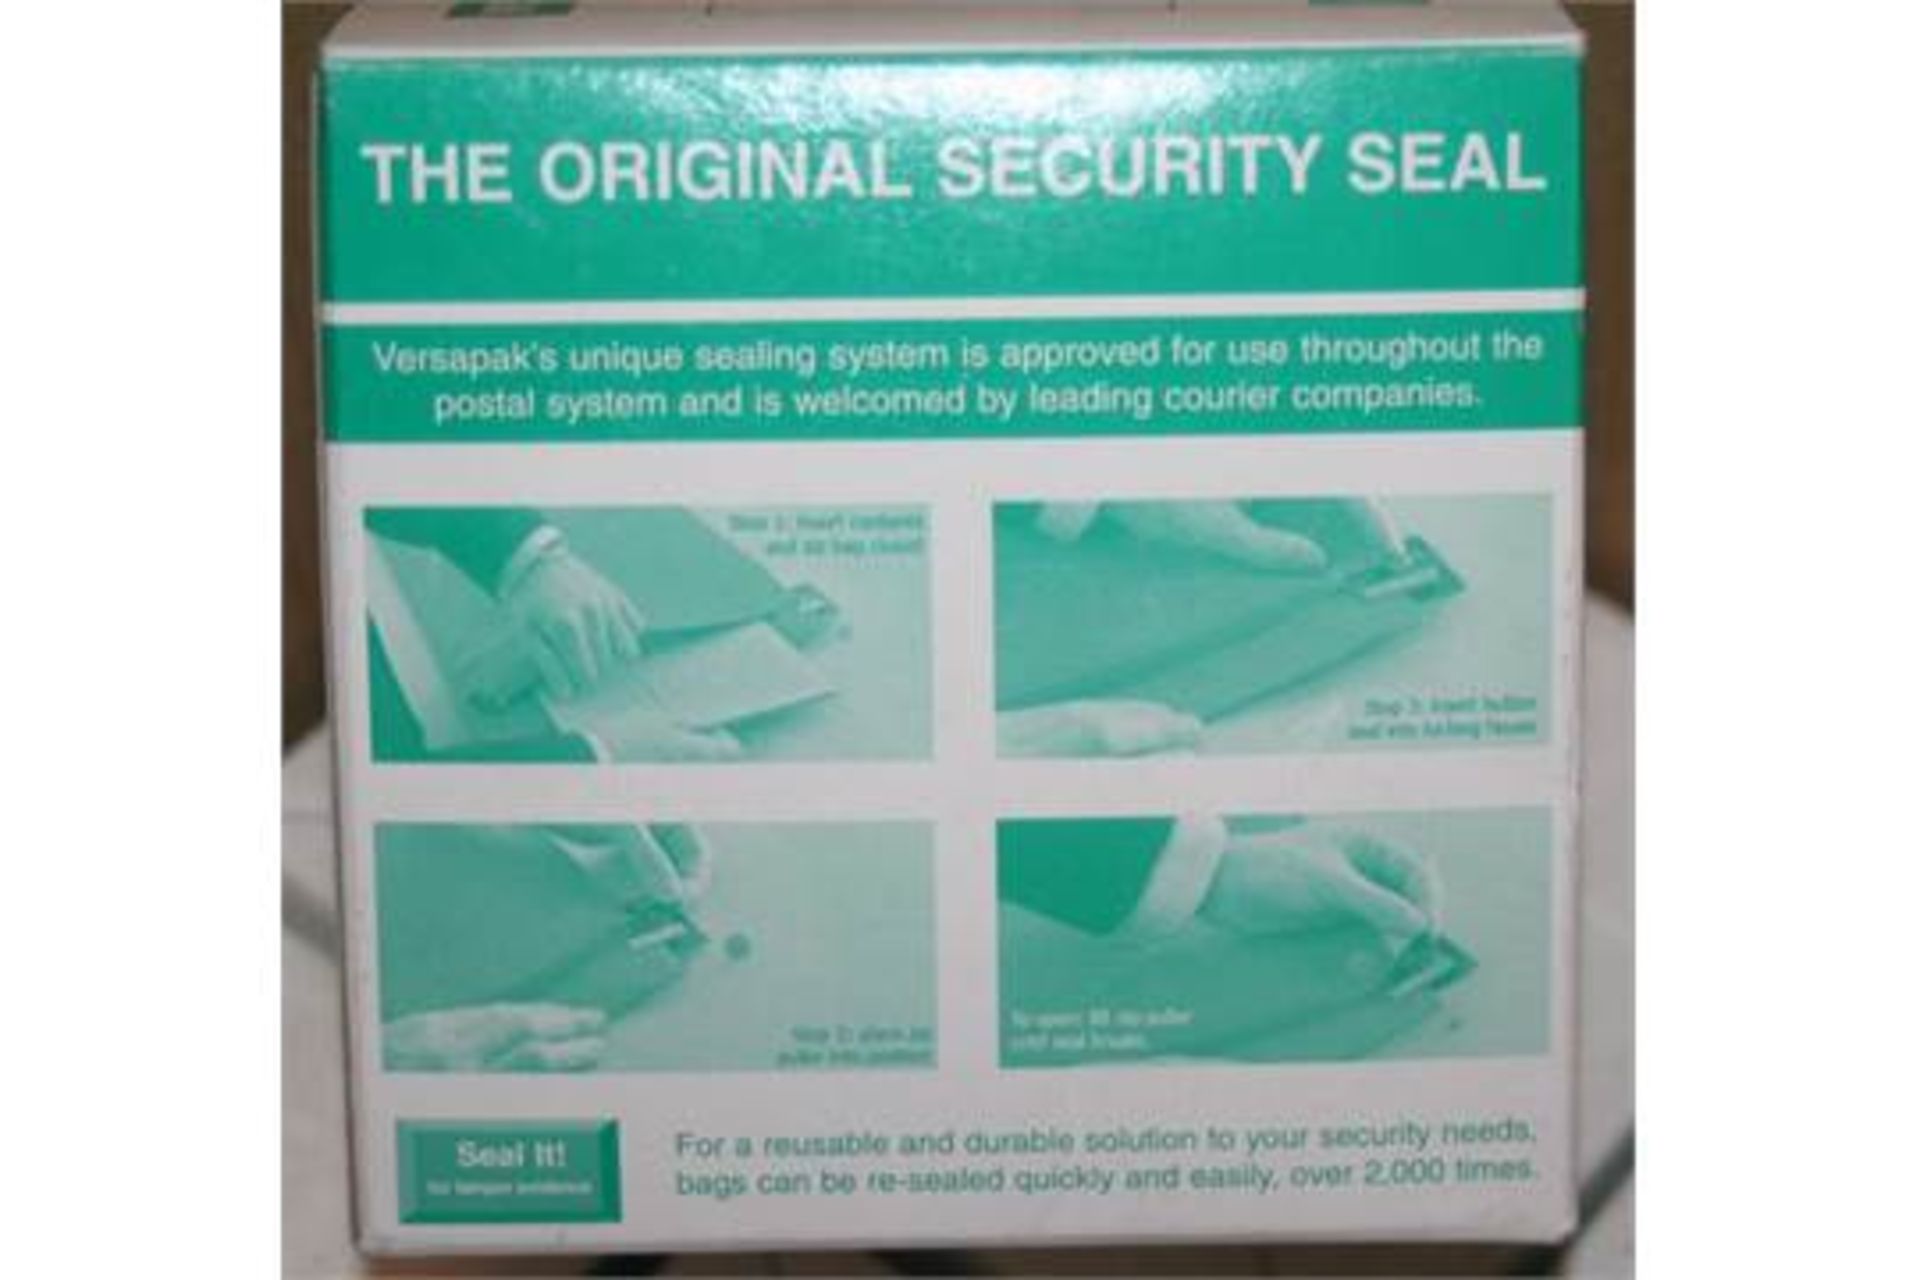 5,000 x Versapak Security Seals - As Used Throughout The Postal System and Welcomed by Leading - Image 3 of 3